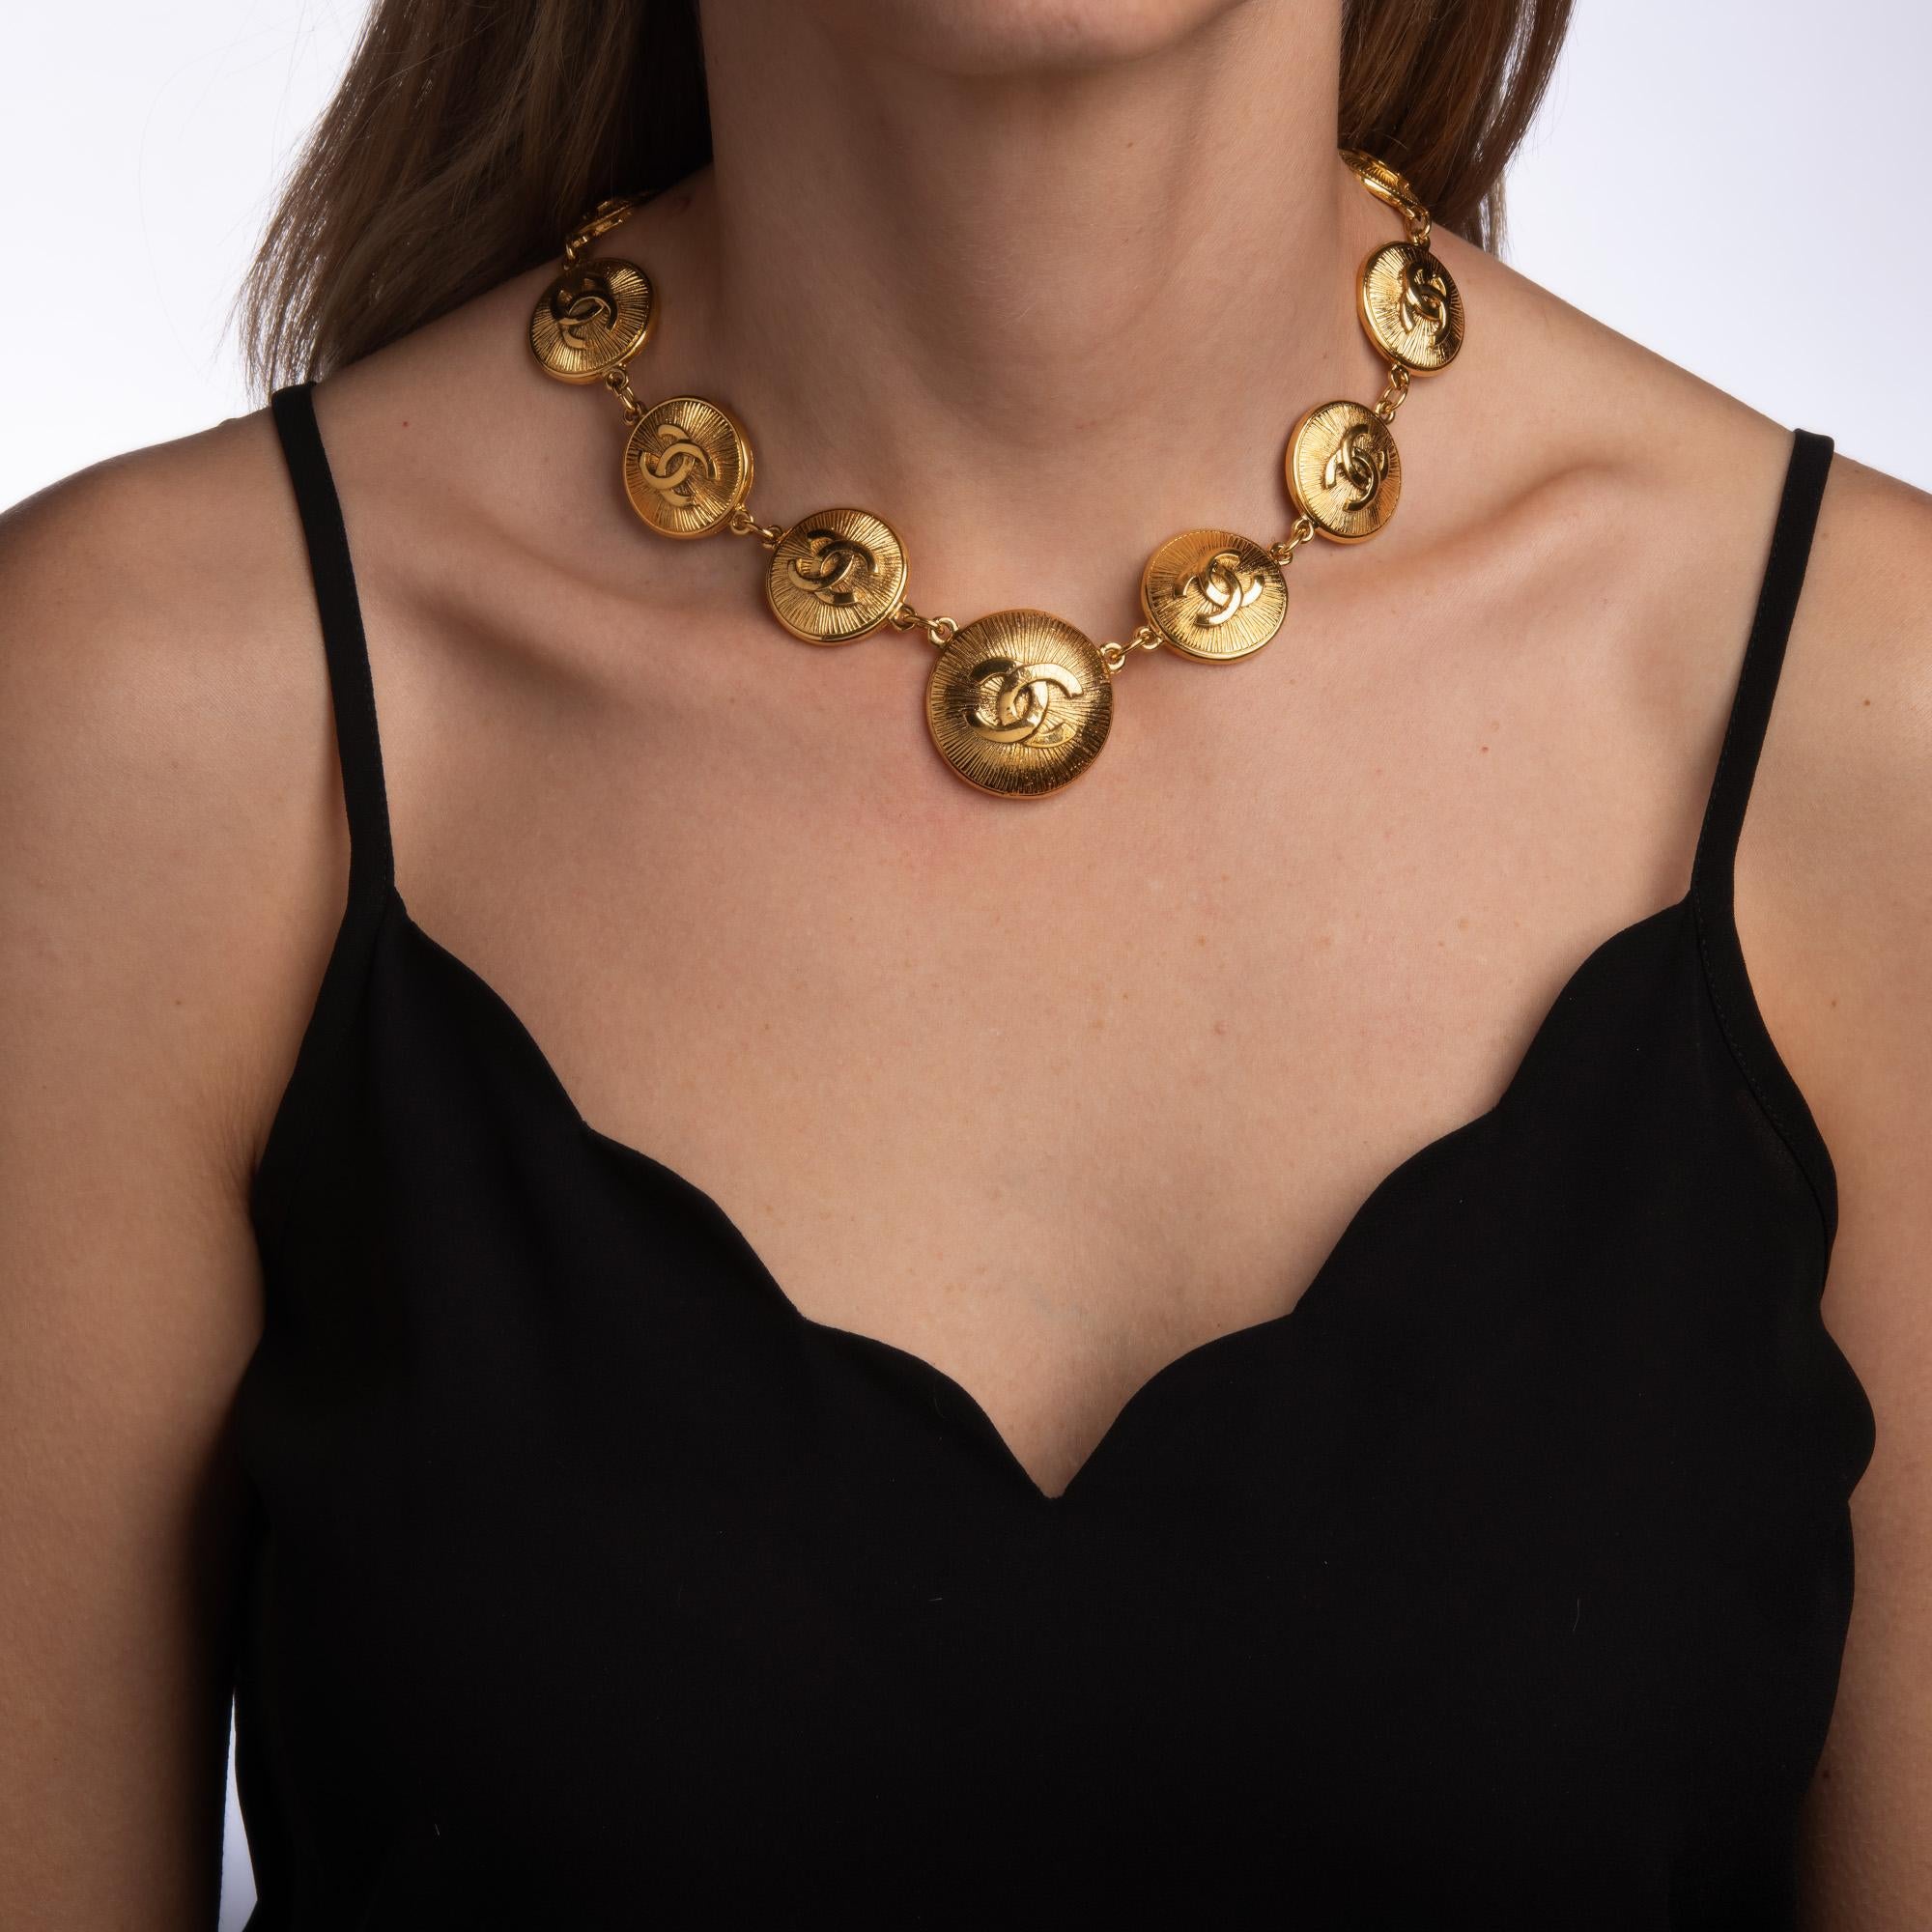 Vintage 80s Chanel medallion necklace crafted in yellow gold-tone (circa early 1980s). 

The necklace features 'CC' logo medallions that graduate in size from 22mm (0.86 inches) to 32mm (1.25 inches). Measuring 17 inches in length the necklace is